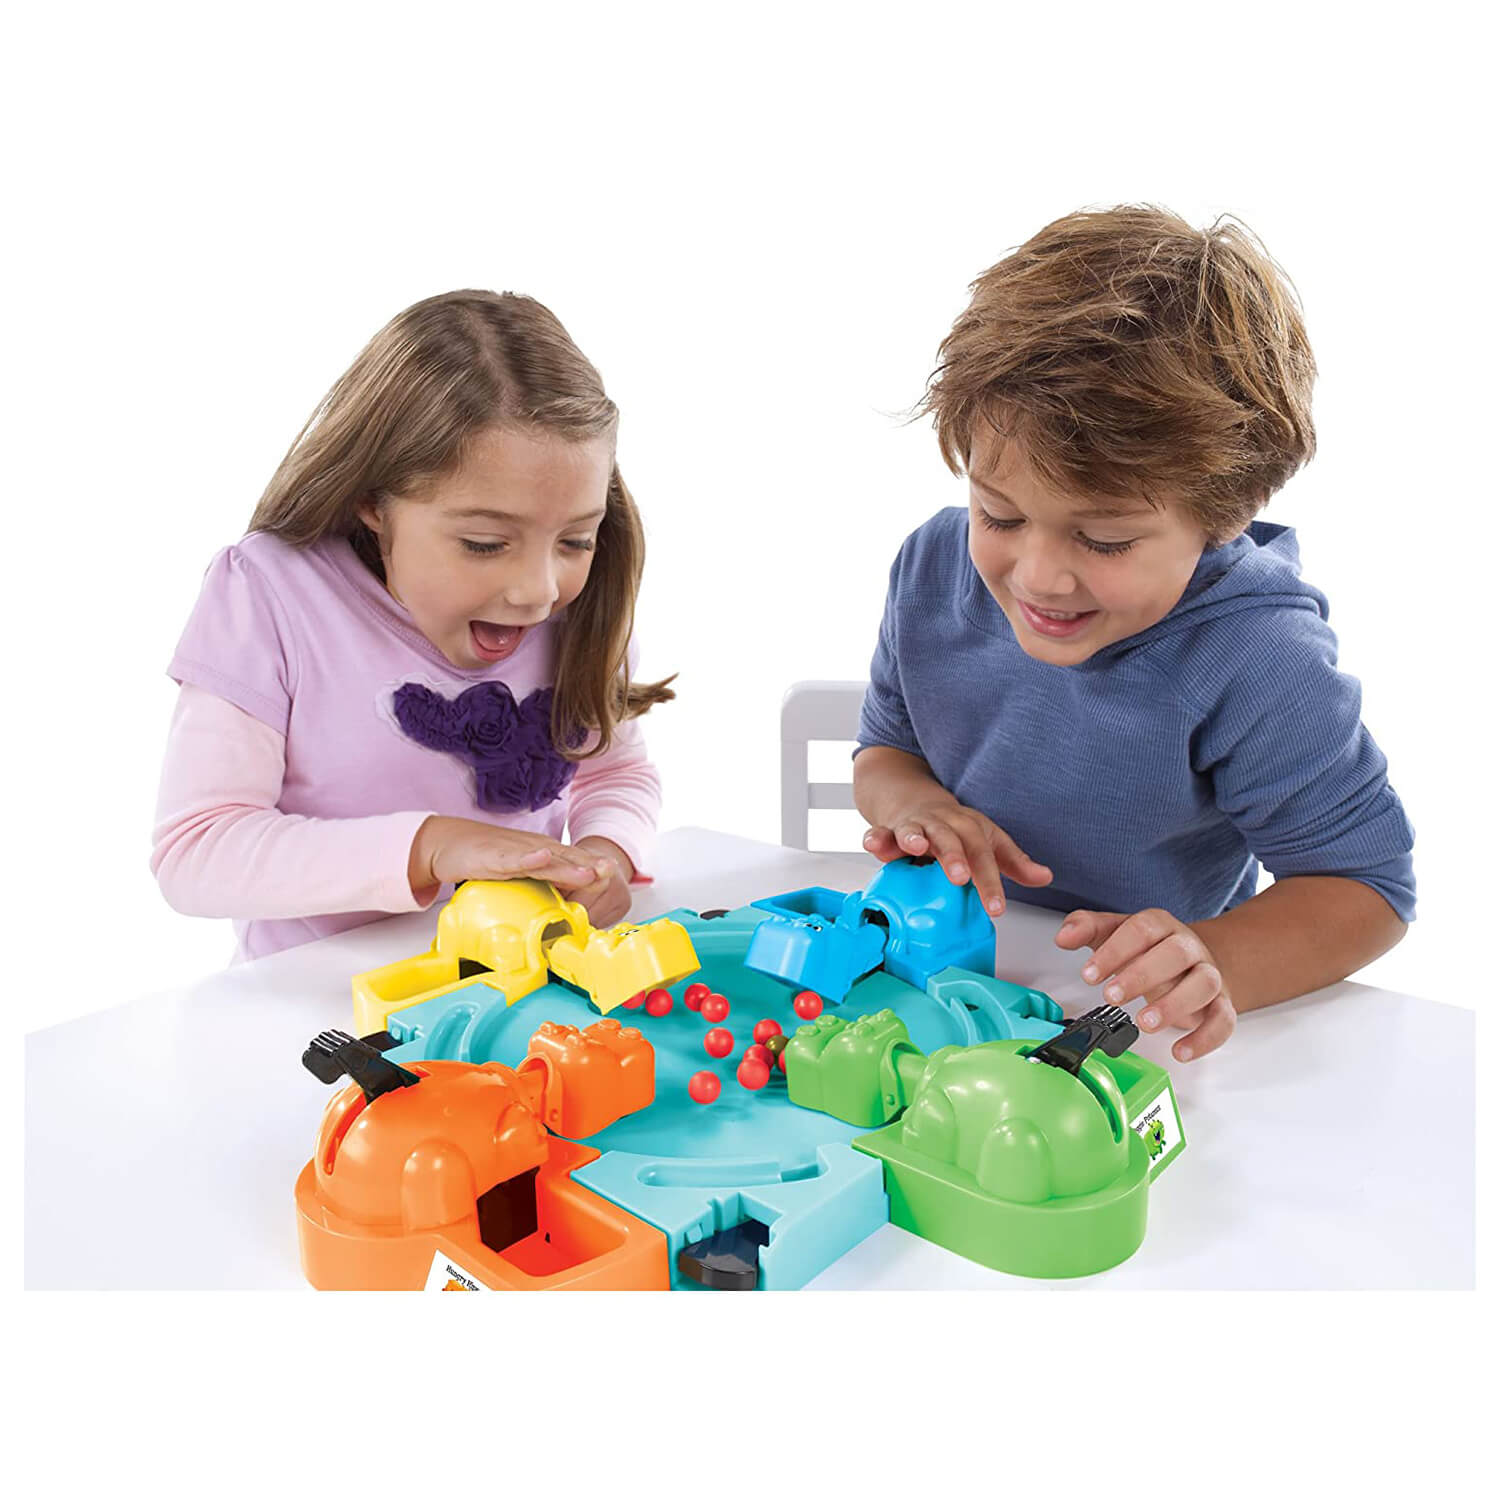 Kids playing the hungry hippos game.